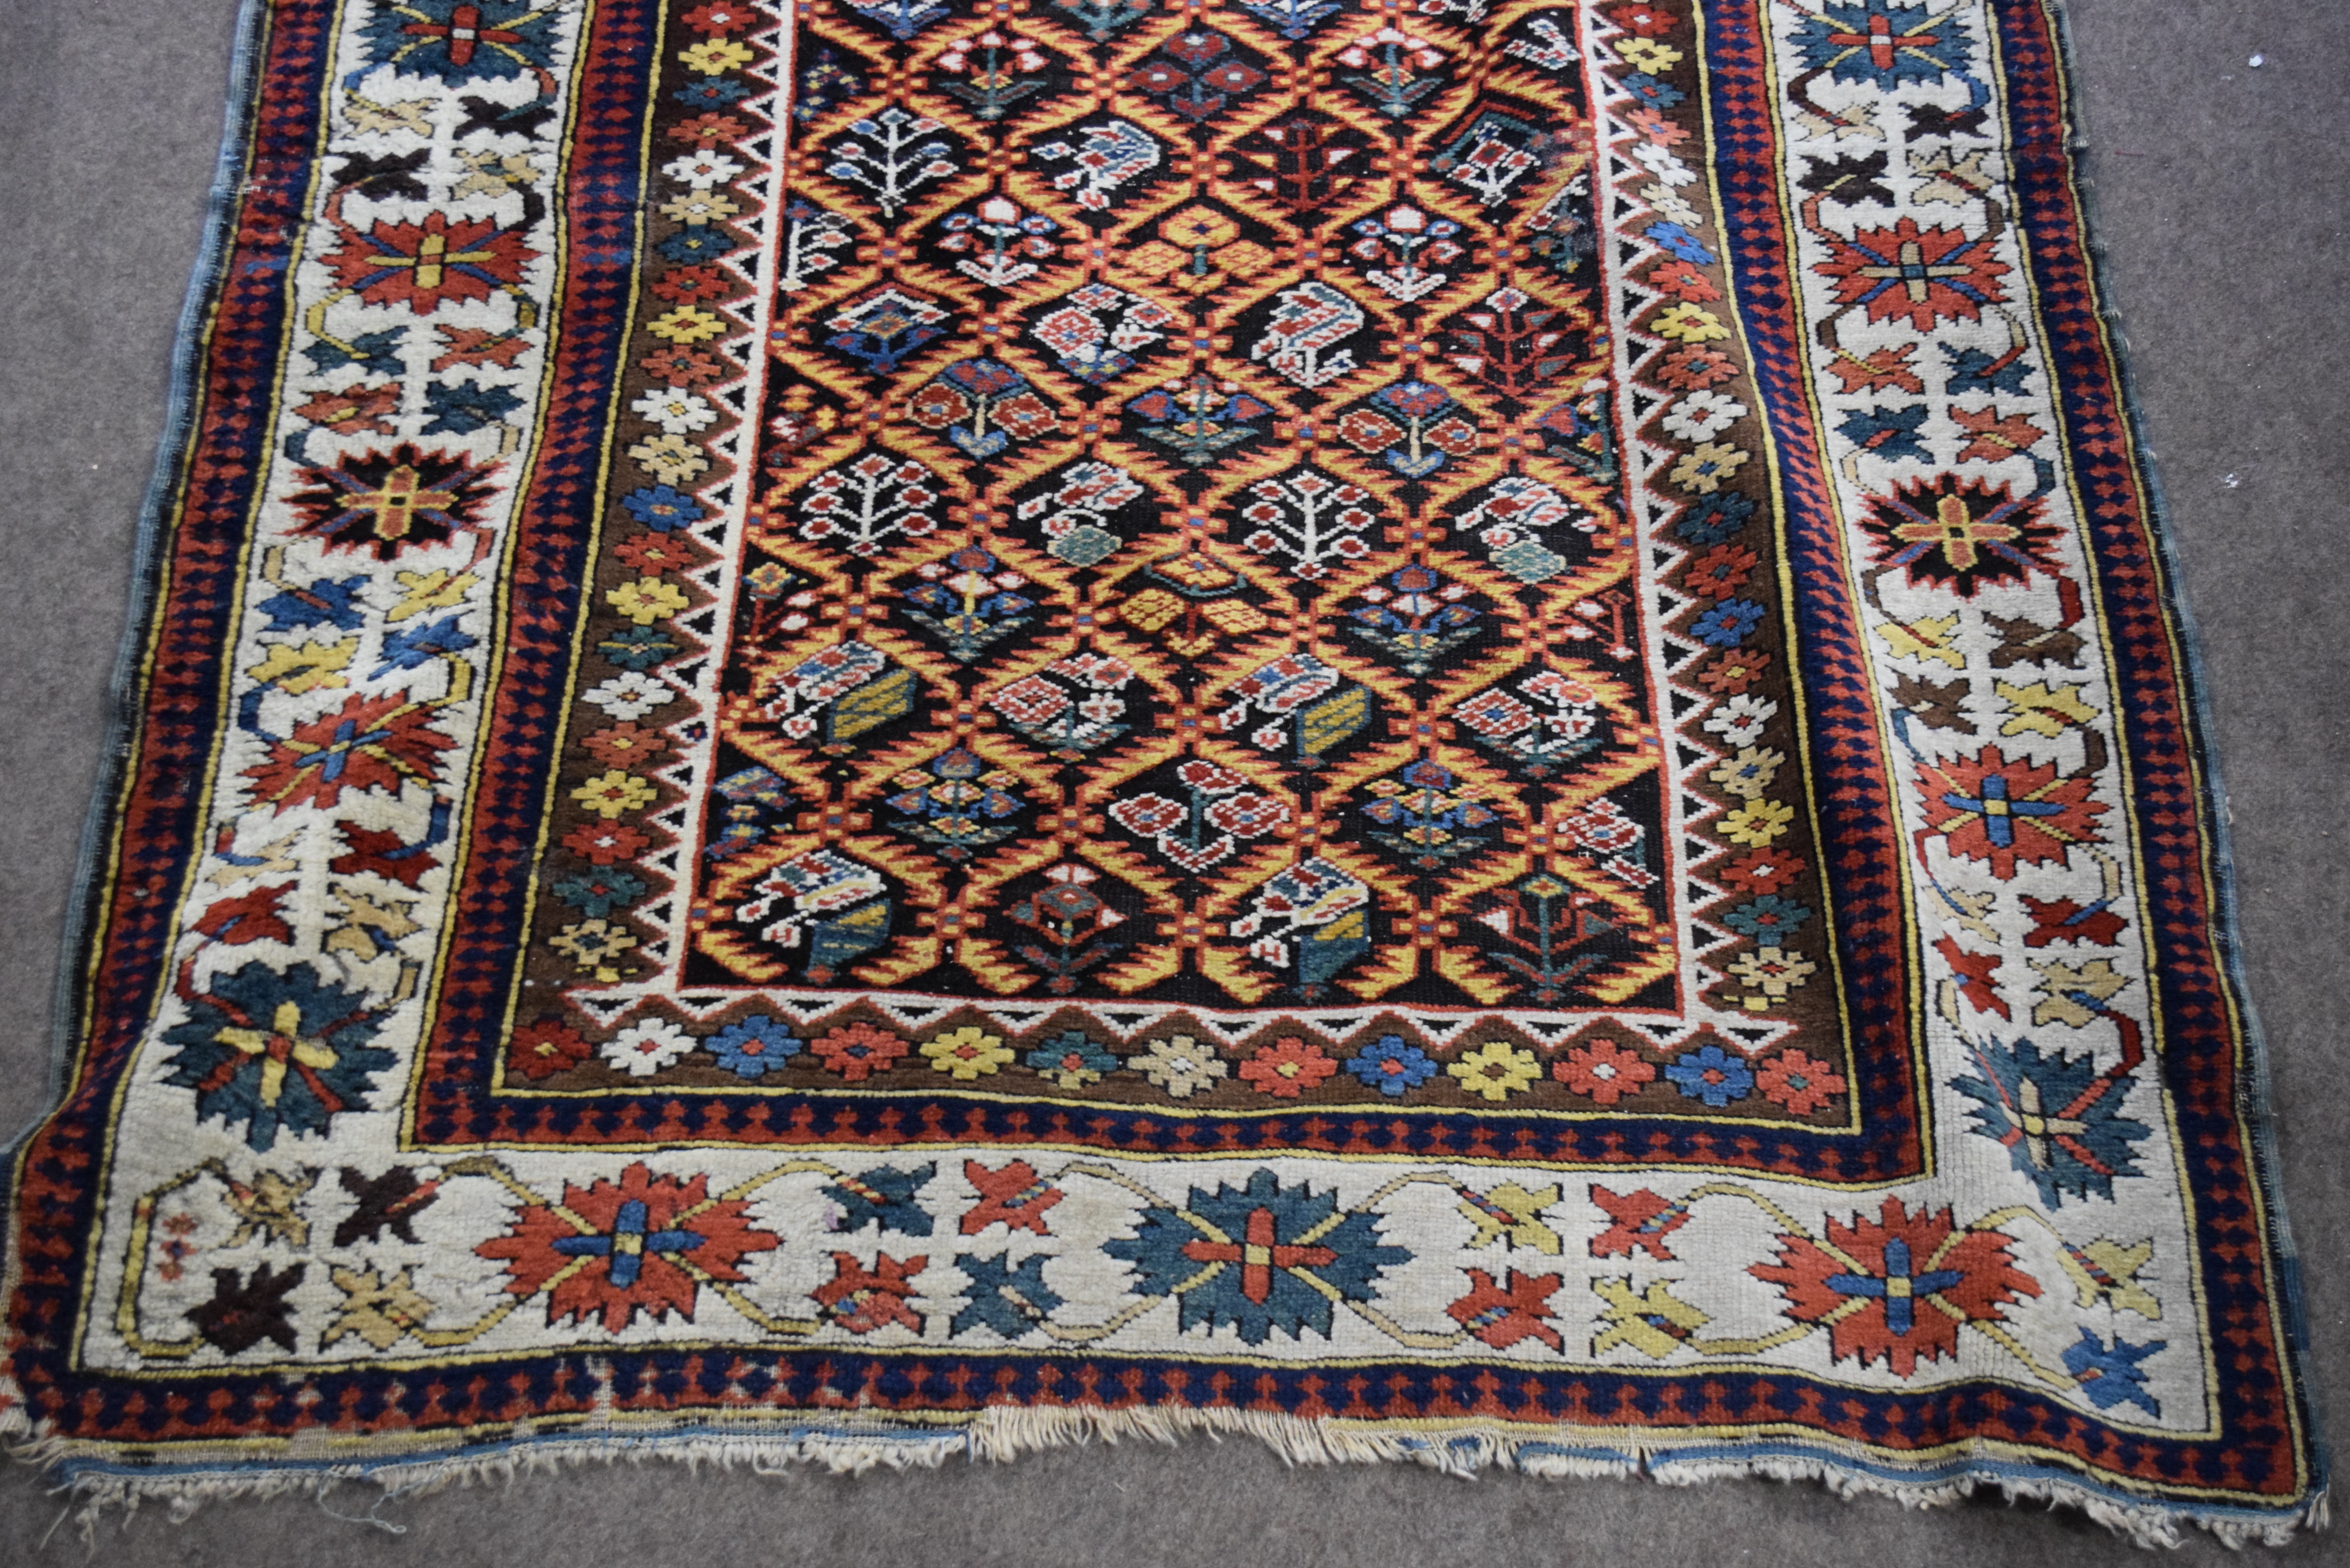 Antique Uzbek runner carpet decorated with large central panel, with stylised foliage detail - Image 5 of 6